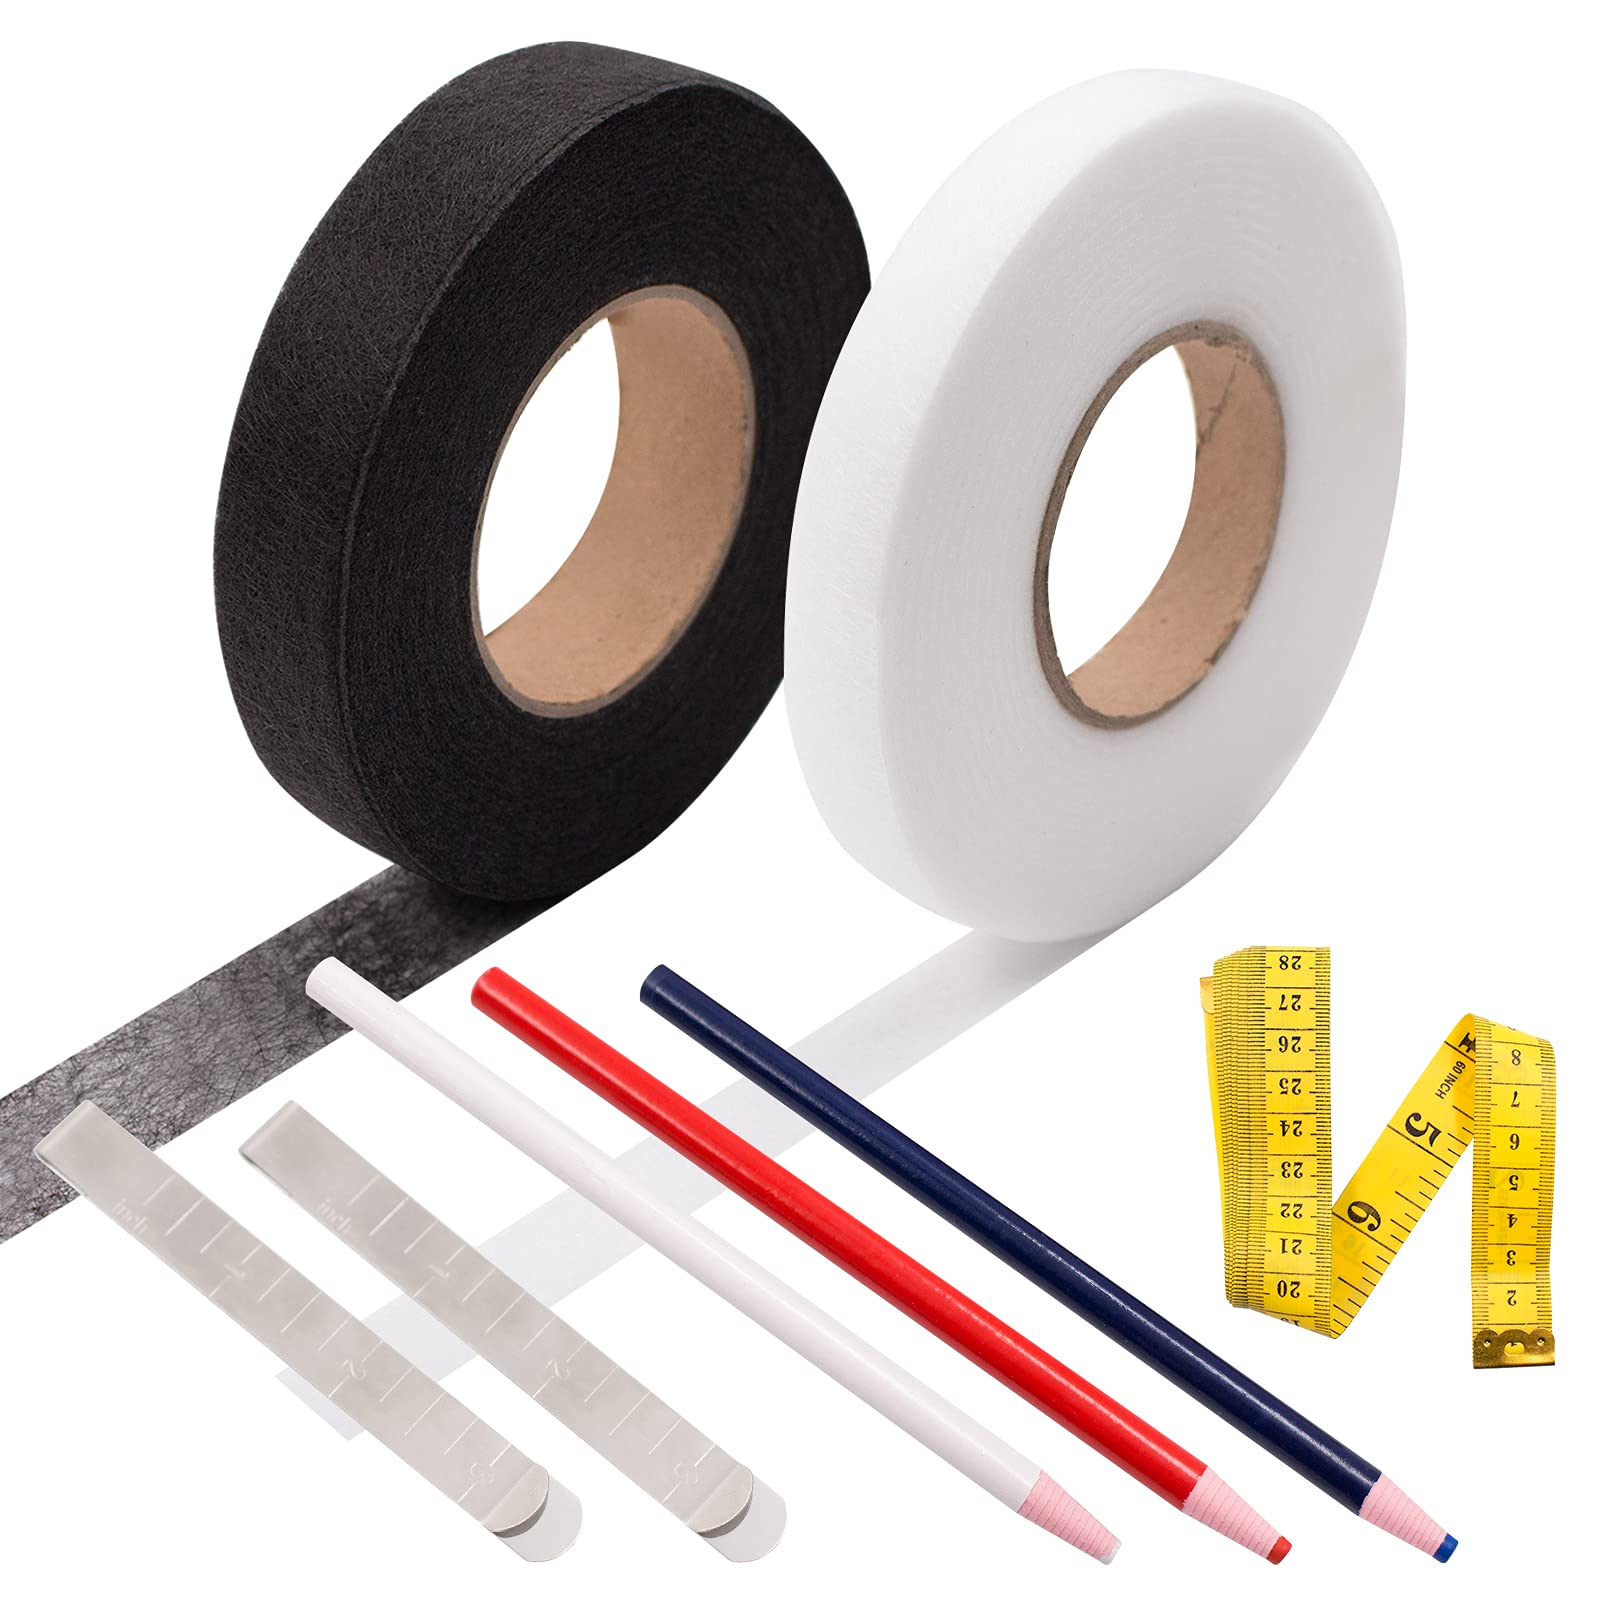 Daily Treasures Iron-on Hemming Tape, 2Rolls 140 Yards Fabric Fusing Tape  with 2 Sewing Clips+3 Mark Pencil & 1 Soft Tape Measure-Bonding Web  Adhesive Tape for Jeans Trousers Garment Cloth(15 & 20 mm)